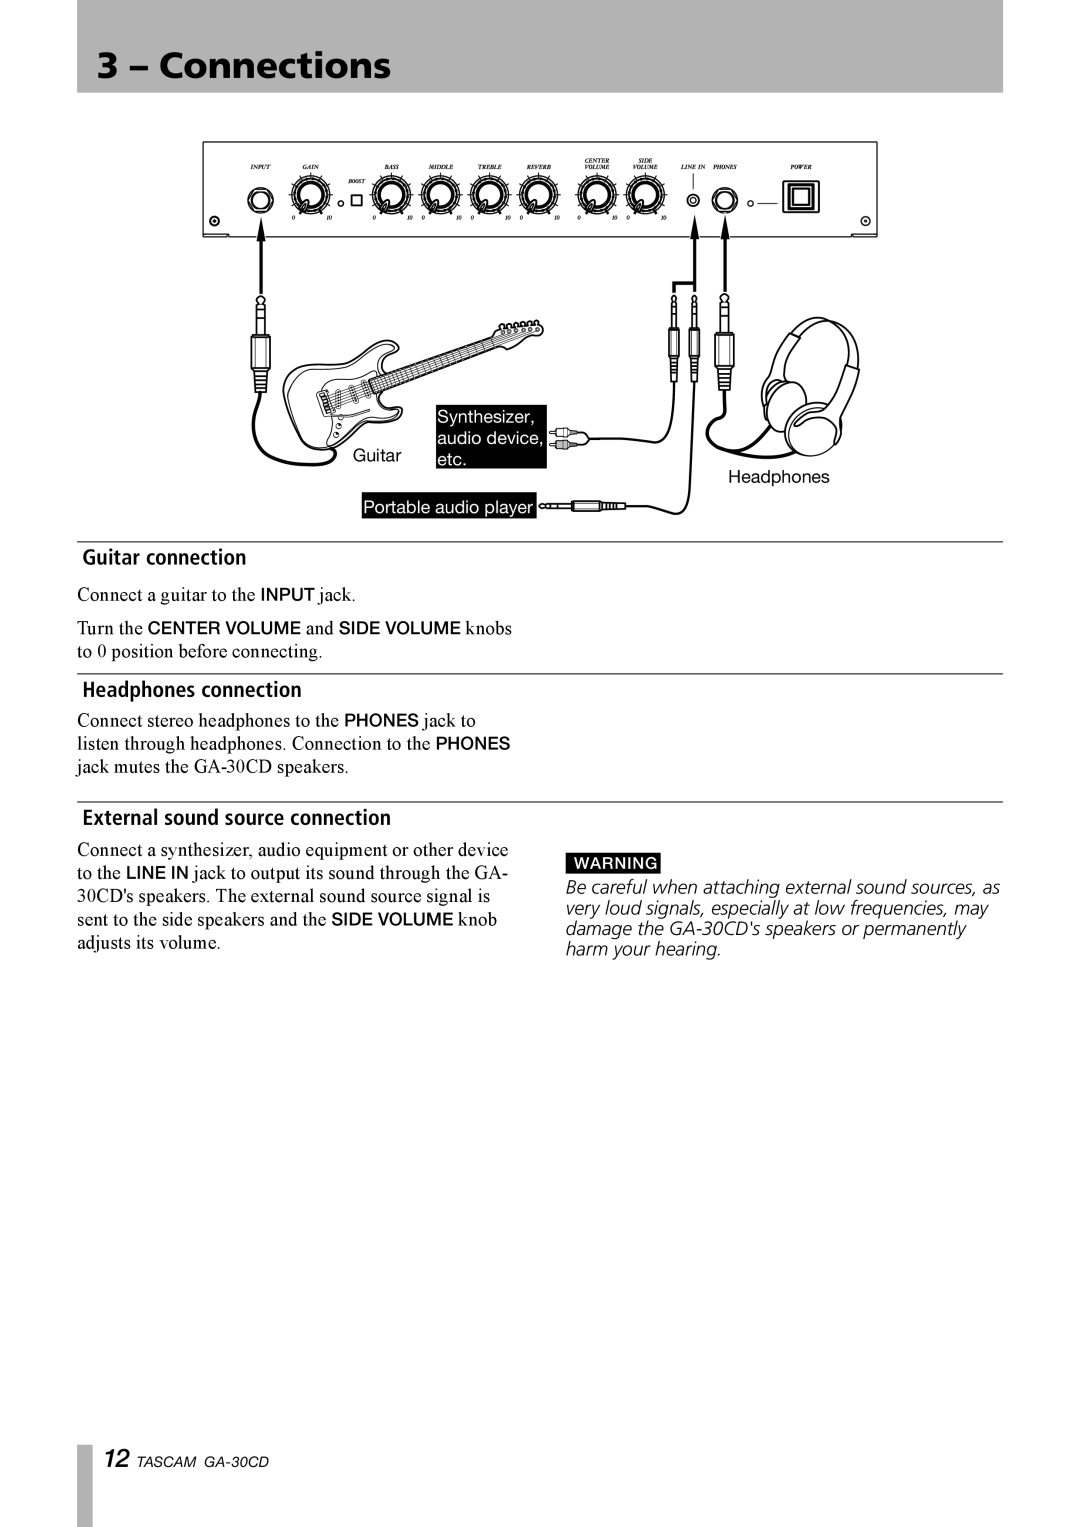 Tascam GA-30CD owner manual Connections, Guitar connection, Headphones connection, External sound source connection 